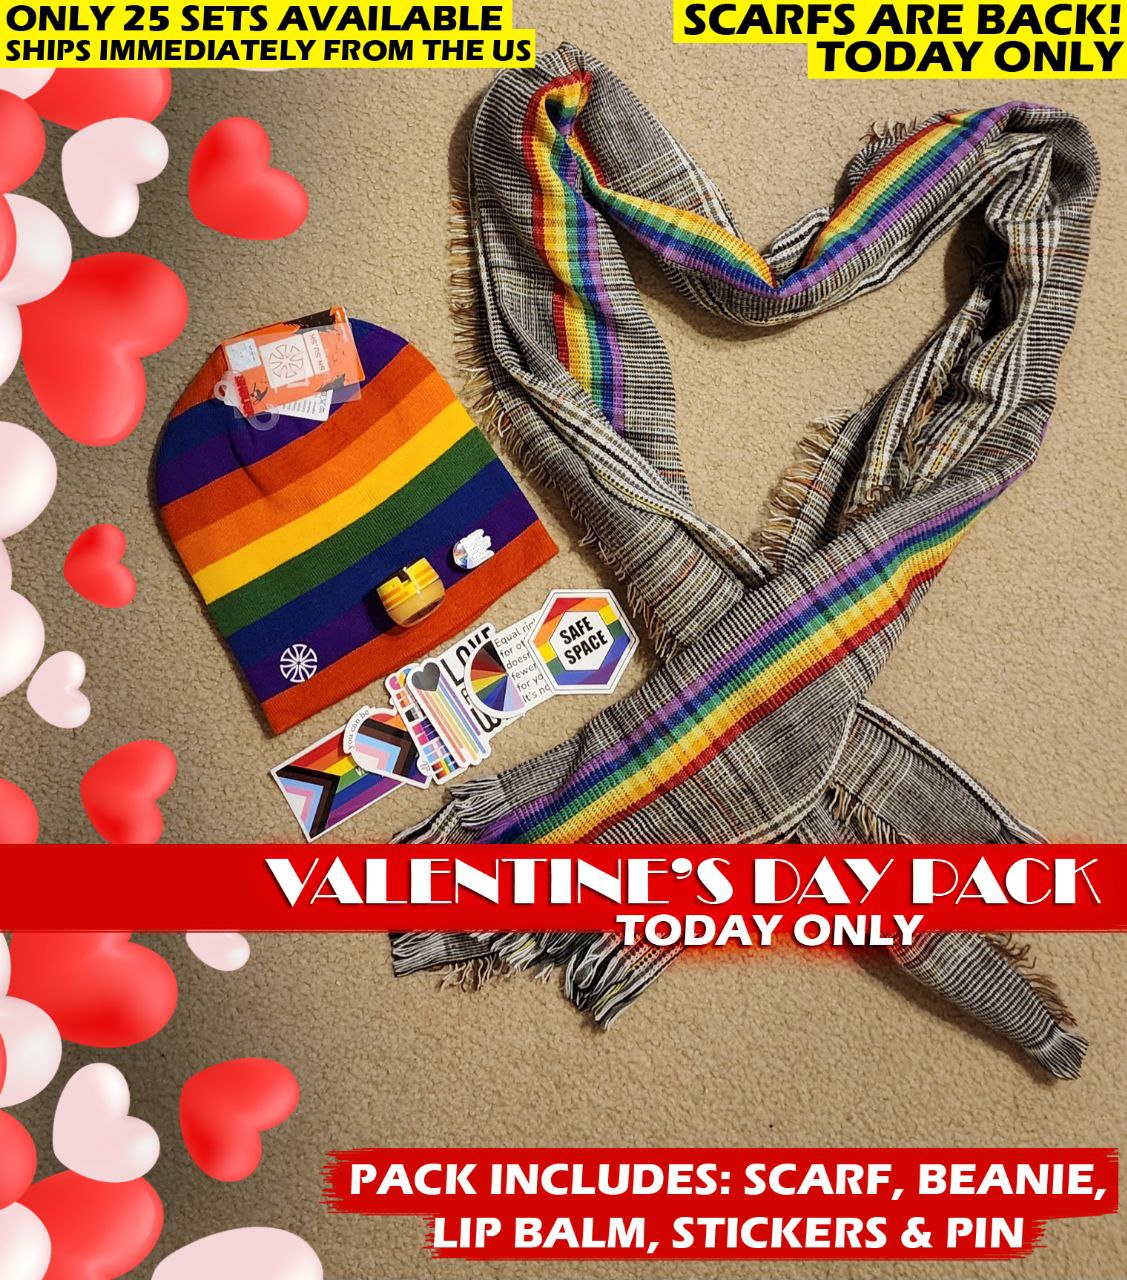 Valentine's Bundle Limited Supply! (Scarf, Beanie, Lip Balm, Pin and Stickers!)